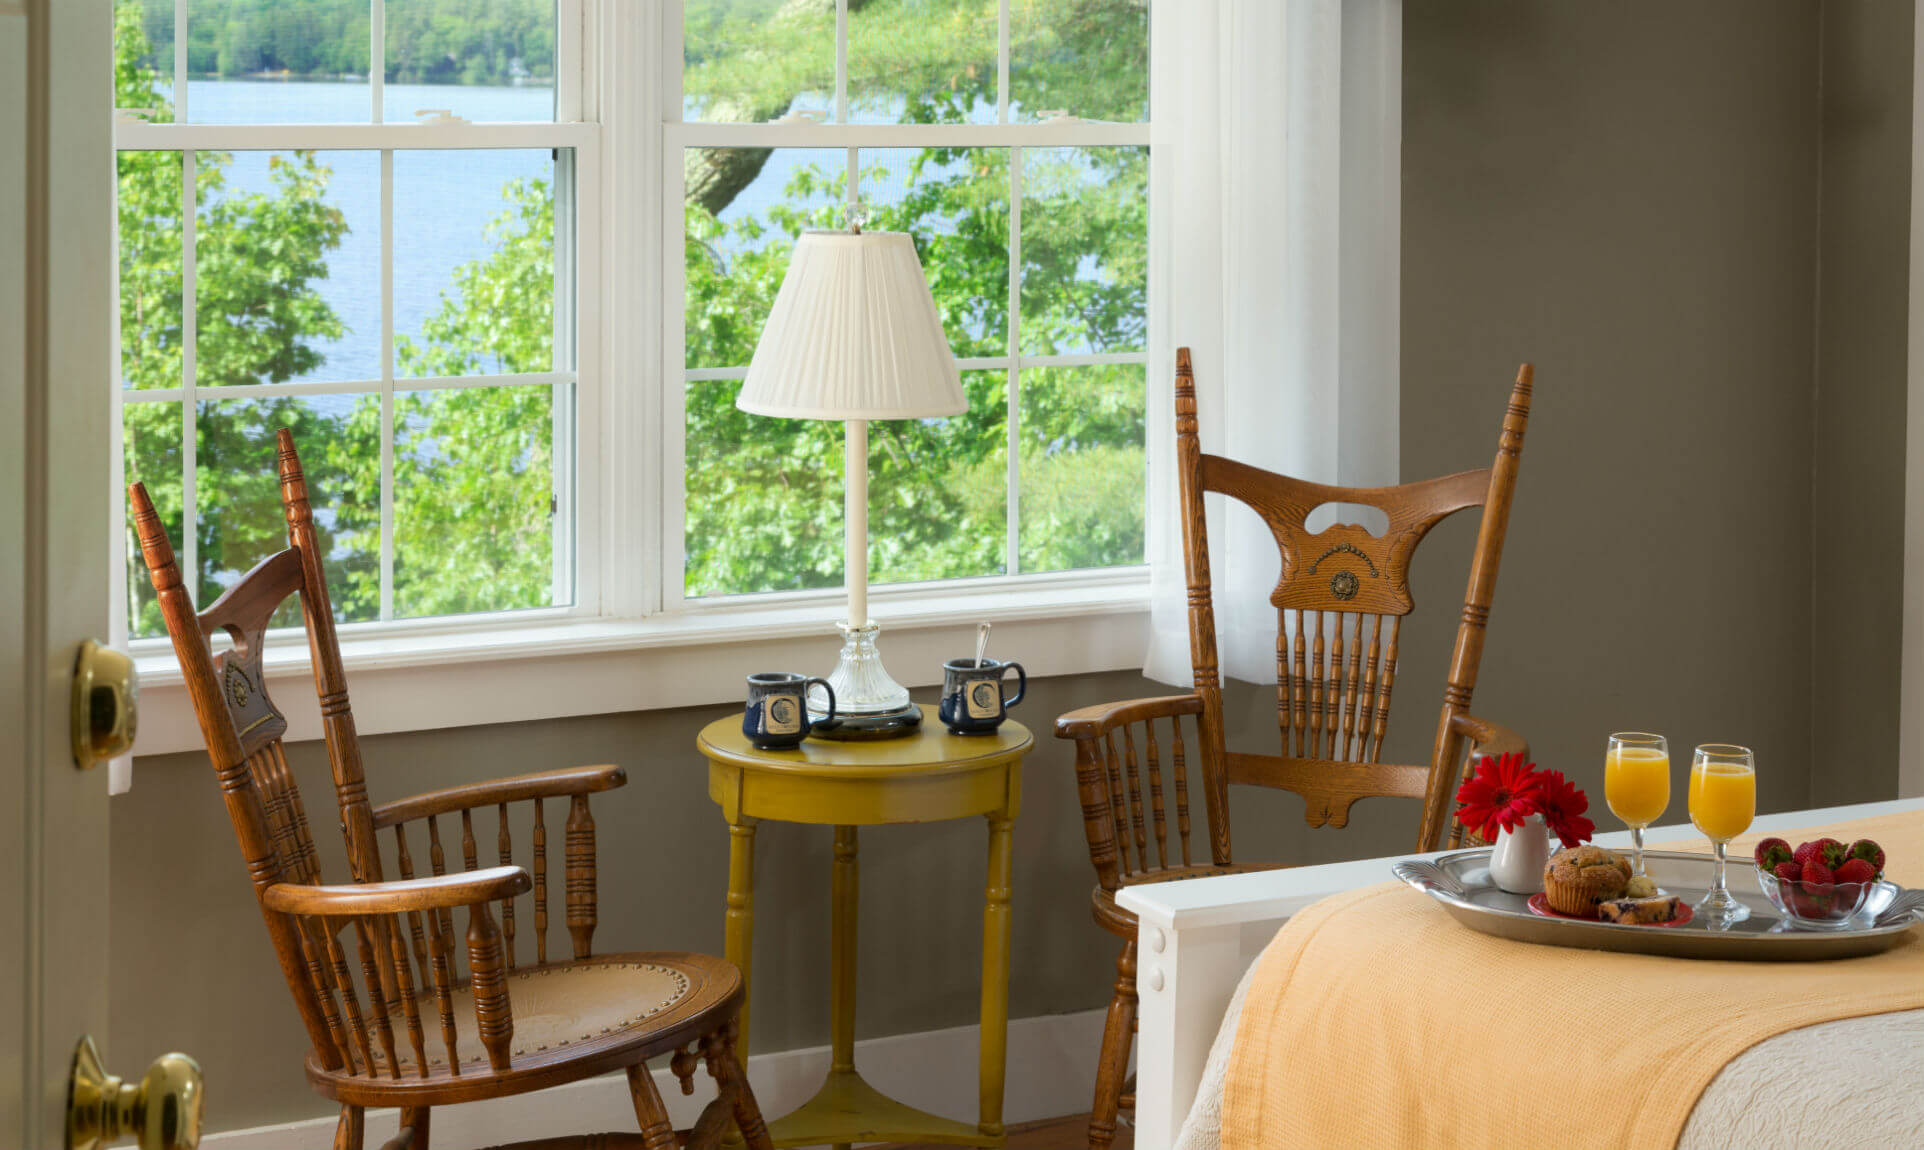 Sitting area with coffee under lamp by window overlooking lake